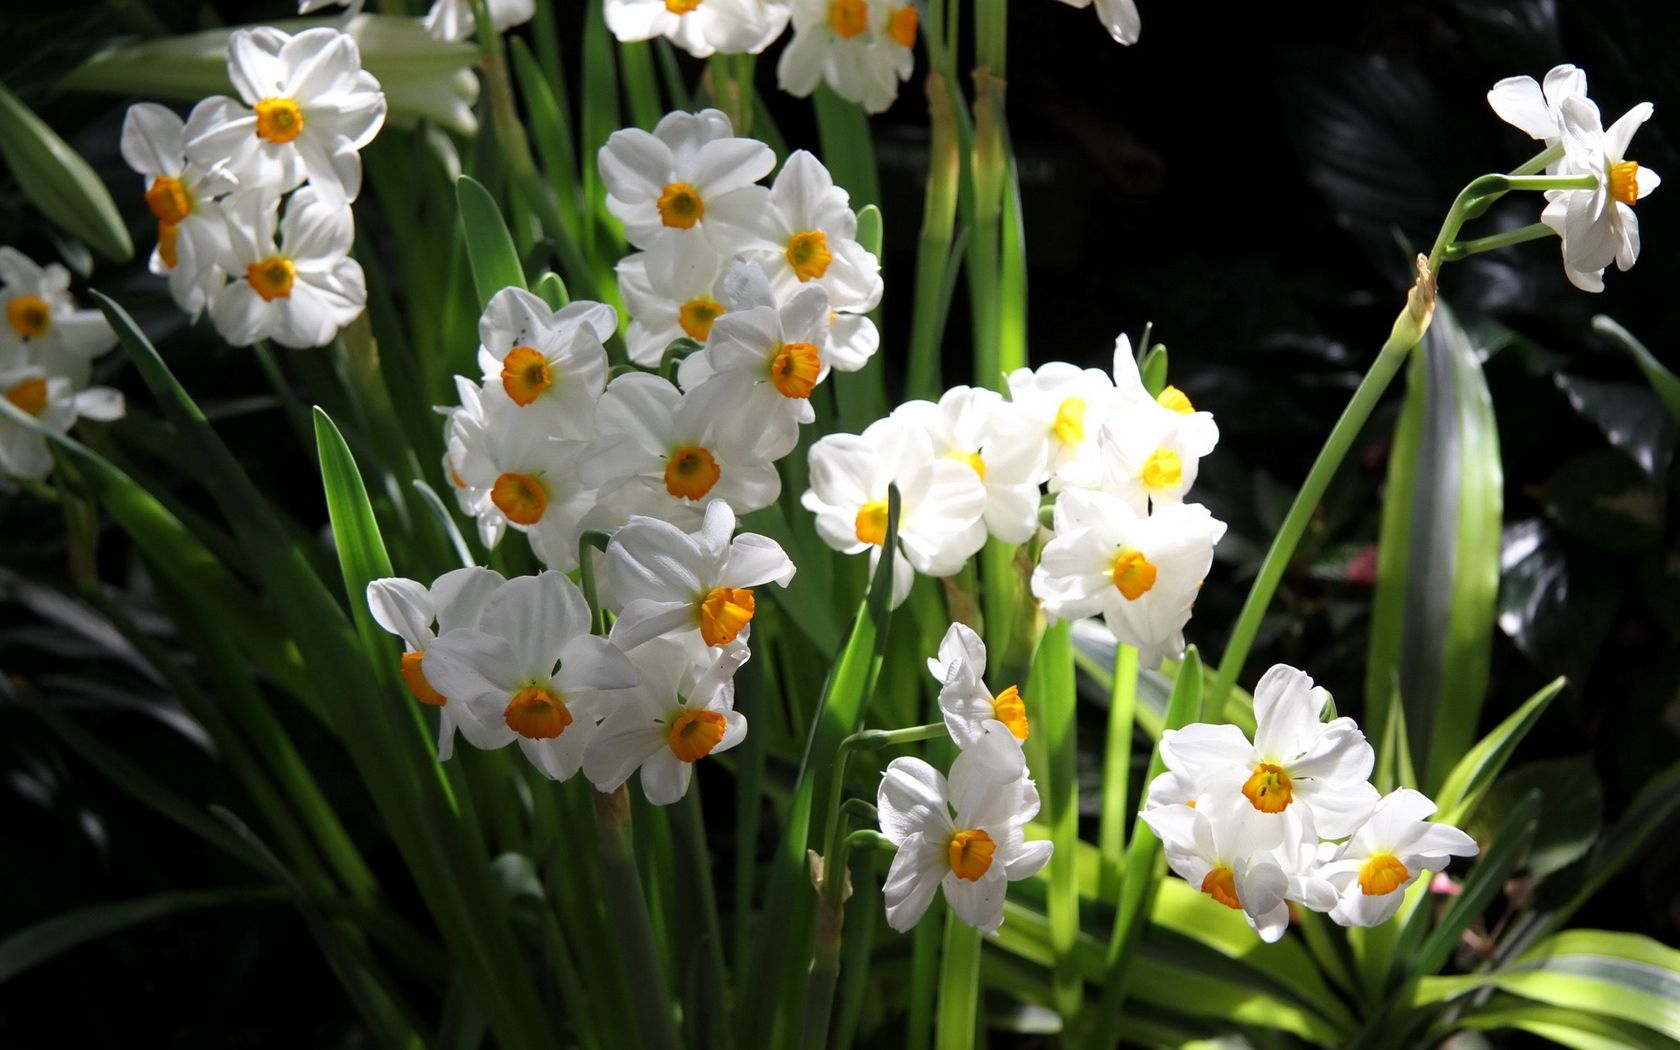 Download wallpaper 1680x1050 daffodils, flowers, spring, flowerbed